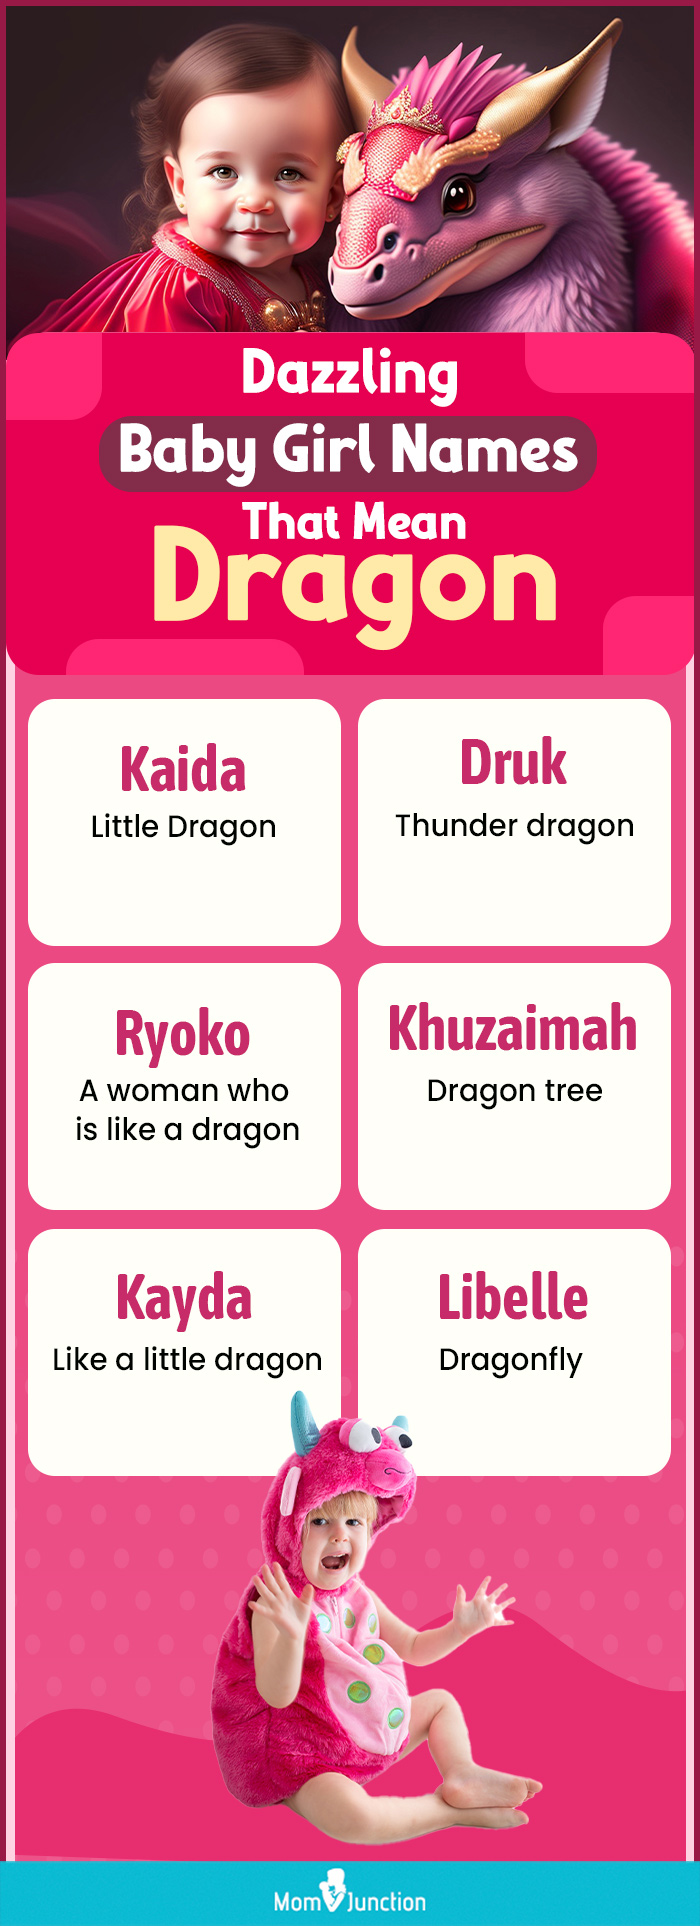 dazzling baby girl names that mean dragon (infographic)